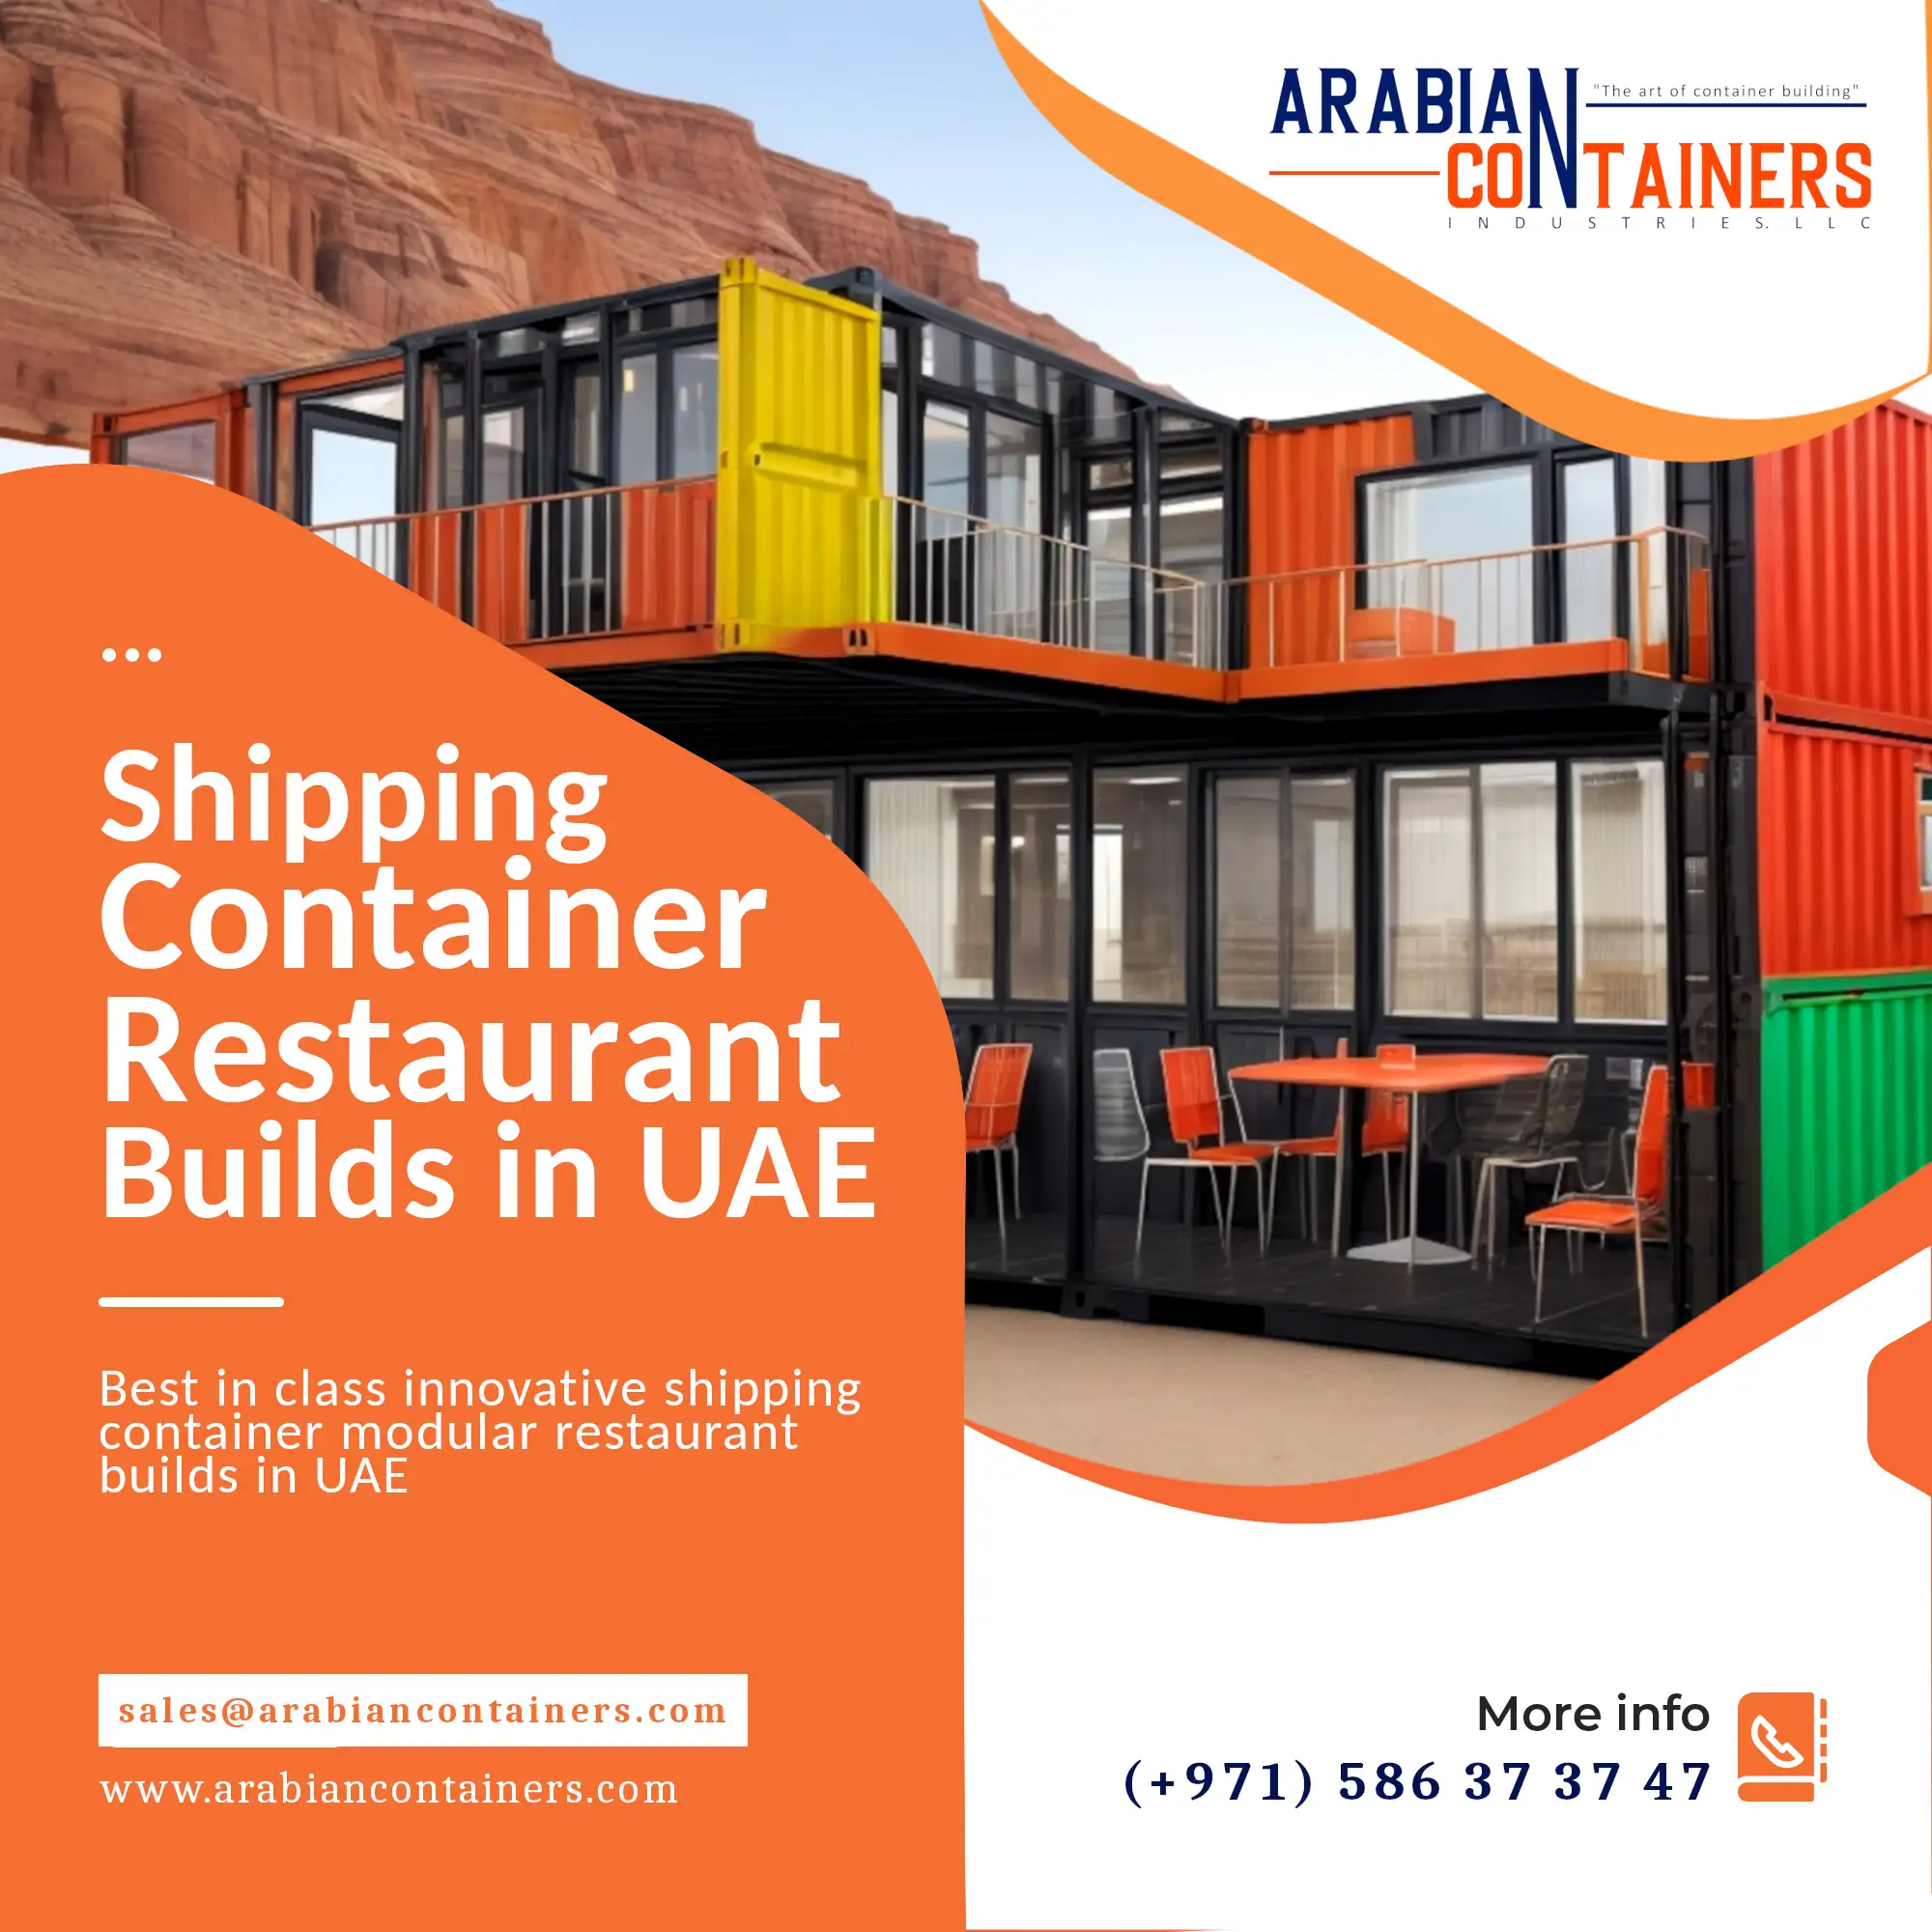 Shipping container restaurant conversion company in UAE.